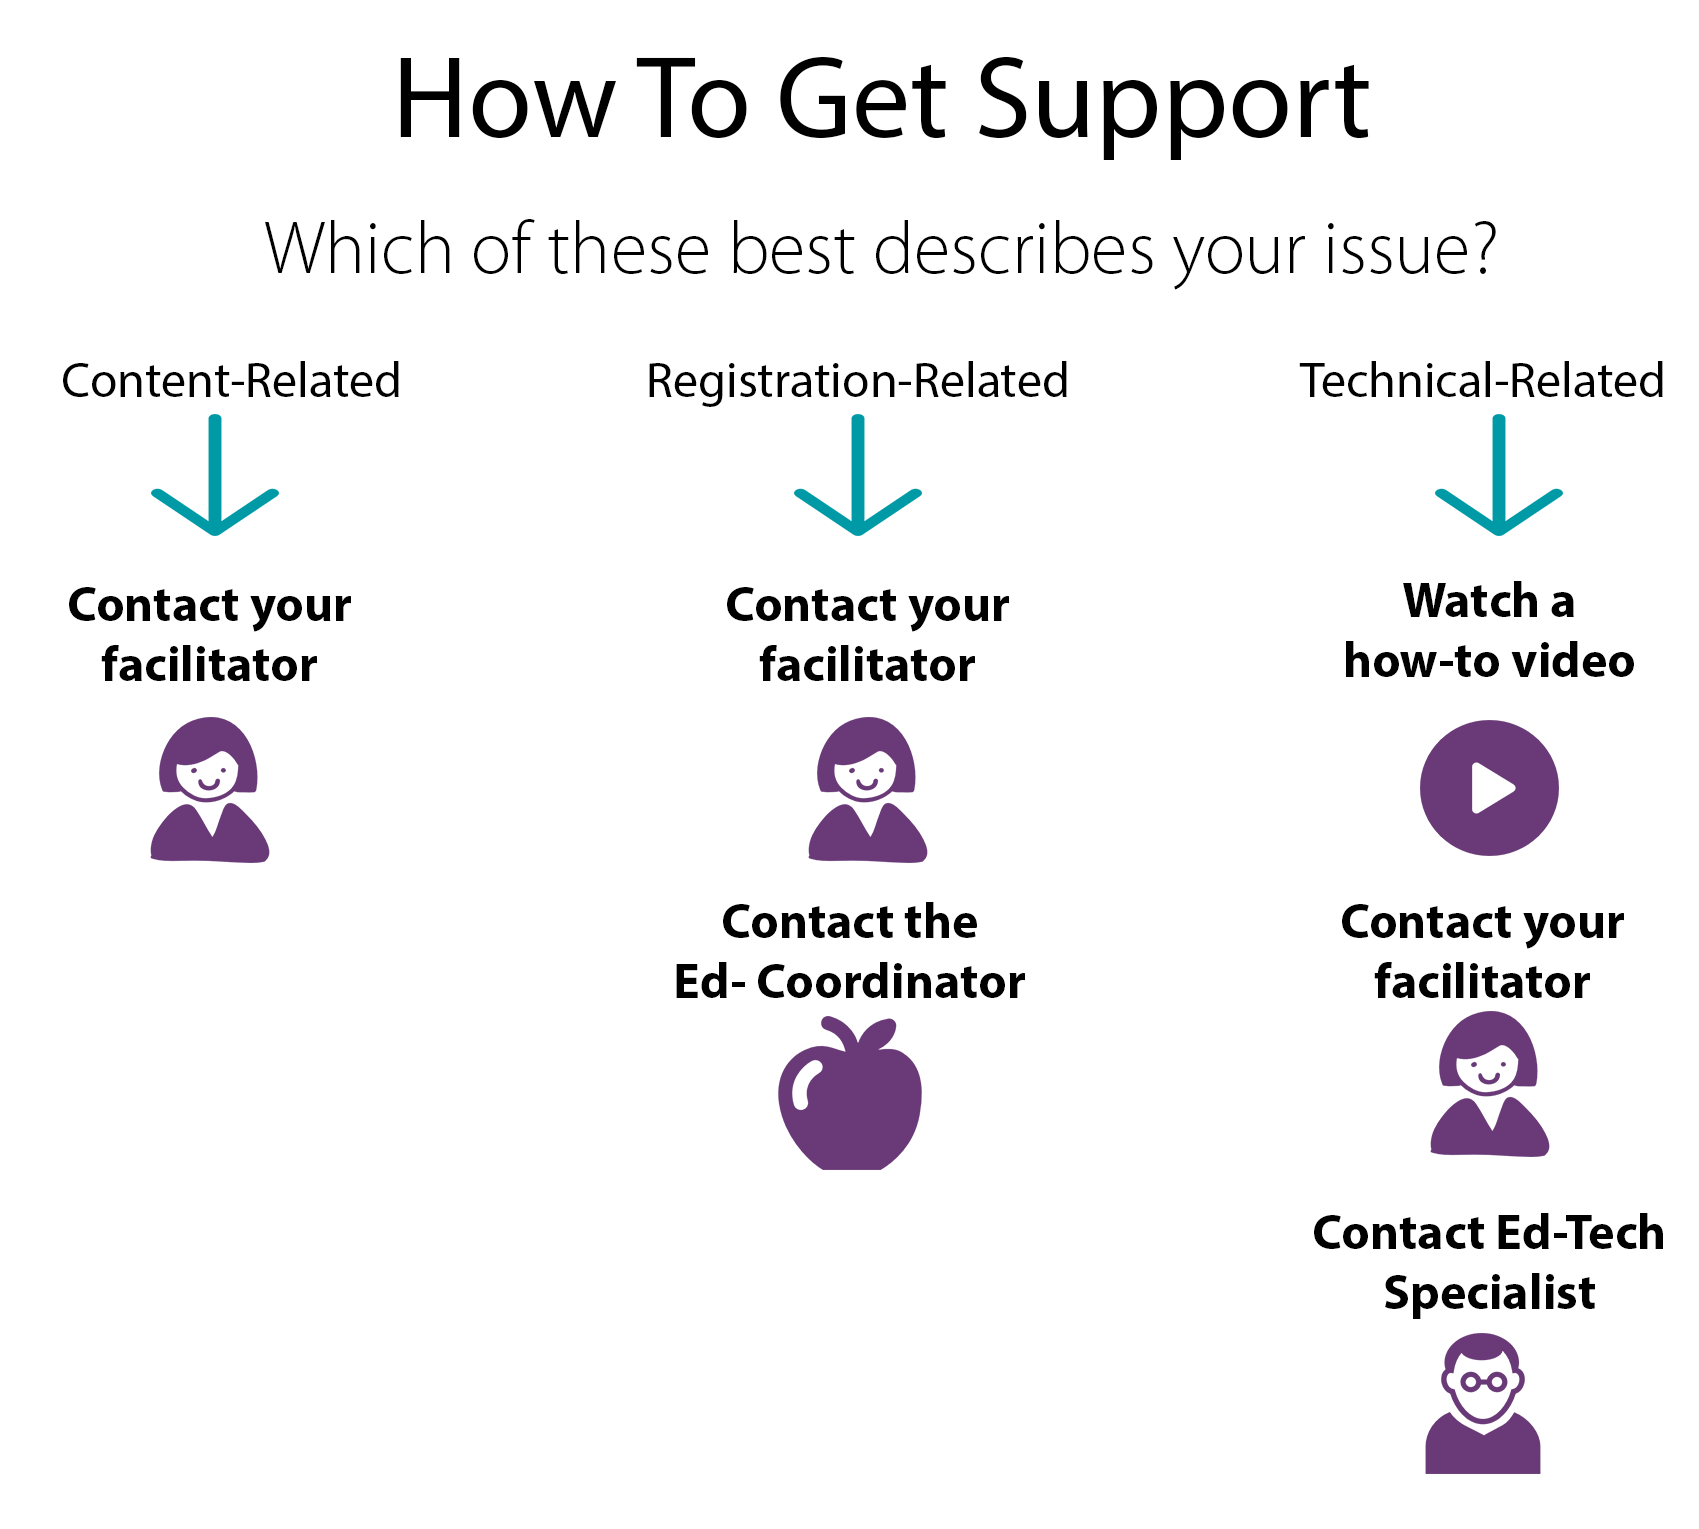 How to Get Support